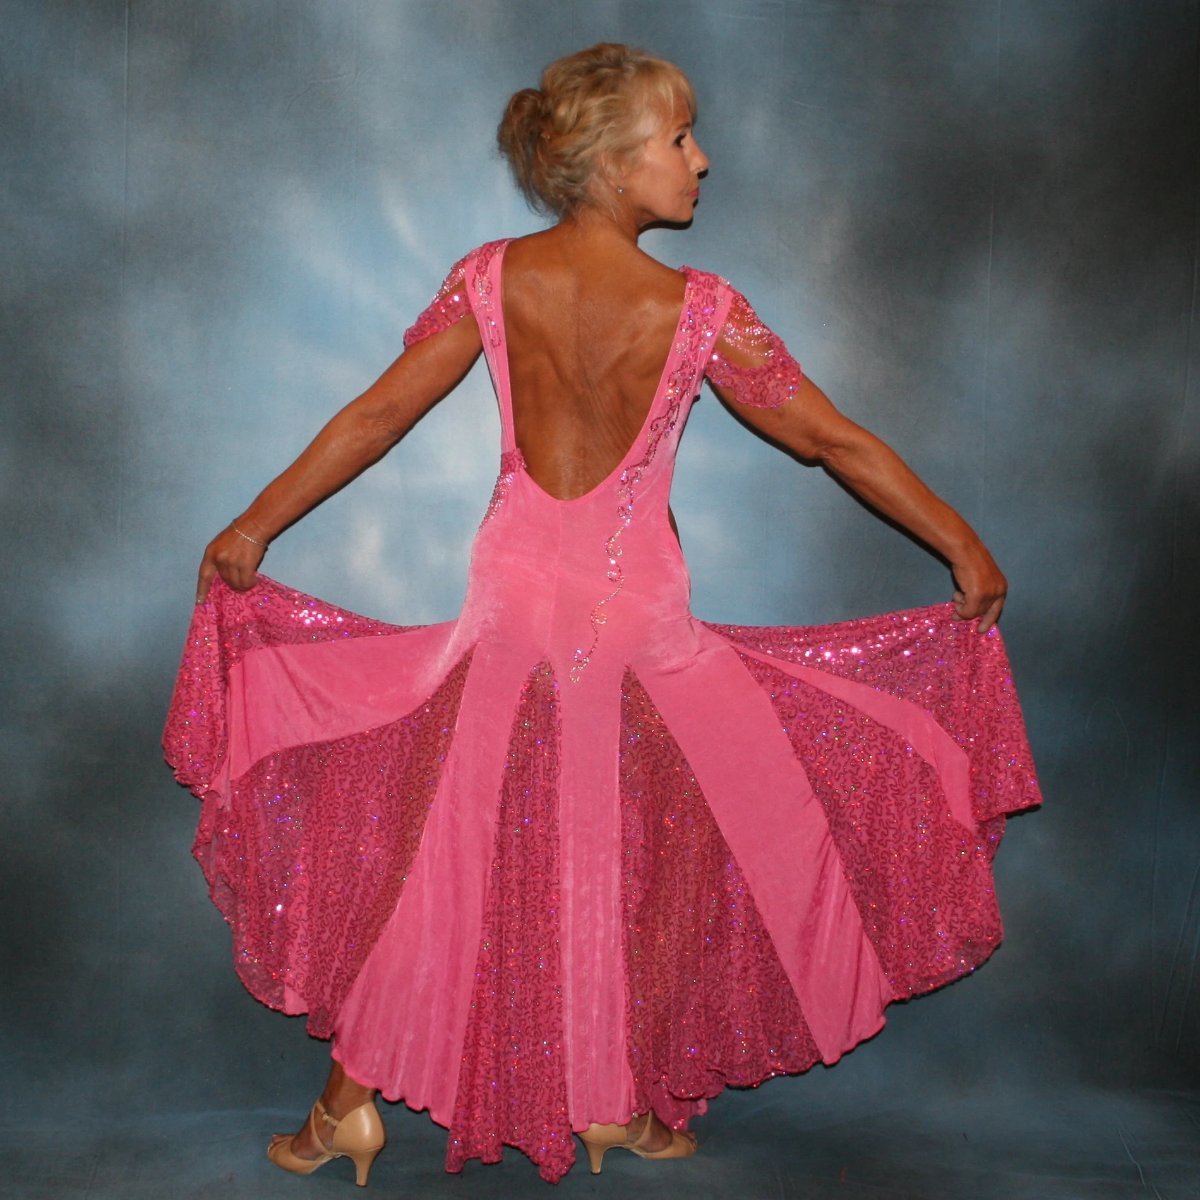 Crystal's Creations back view of Pink ballroom dress was created of luxurious bubble gum pink solid slinky with yards & yards of delicate deep pink sequin insets & is embellished with CAB & rose Swarovski detailed rhinestone work